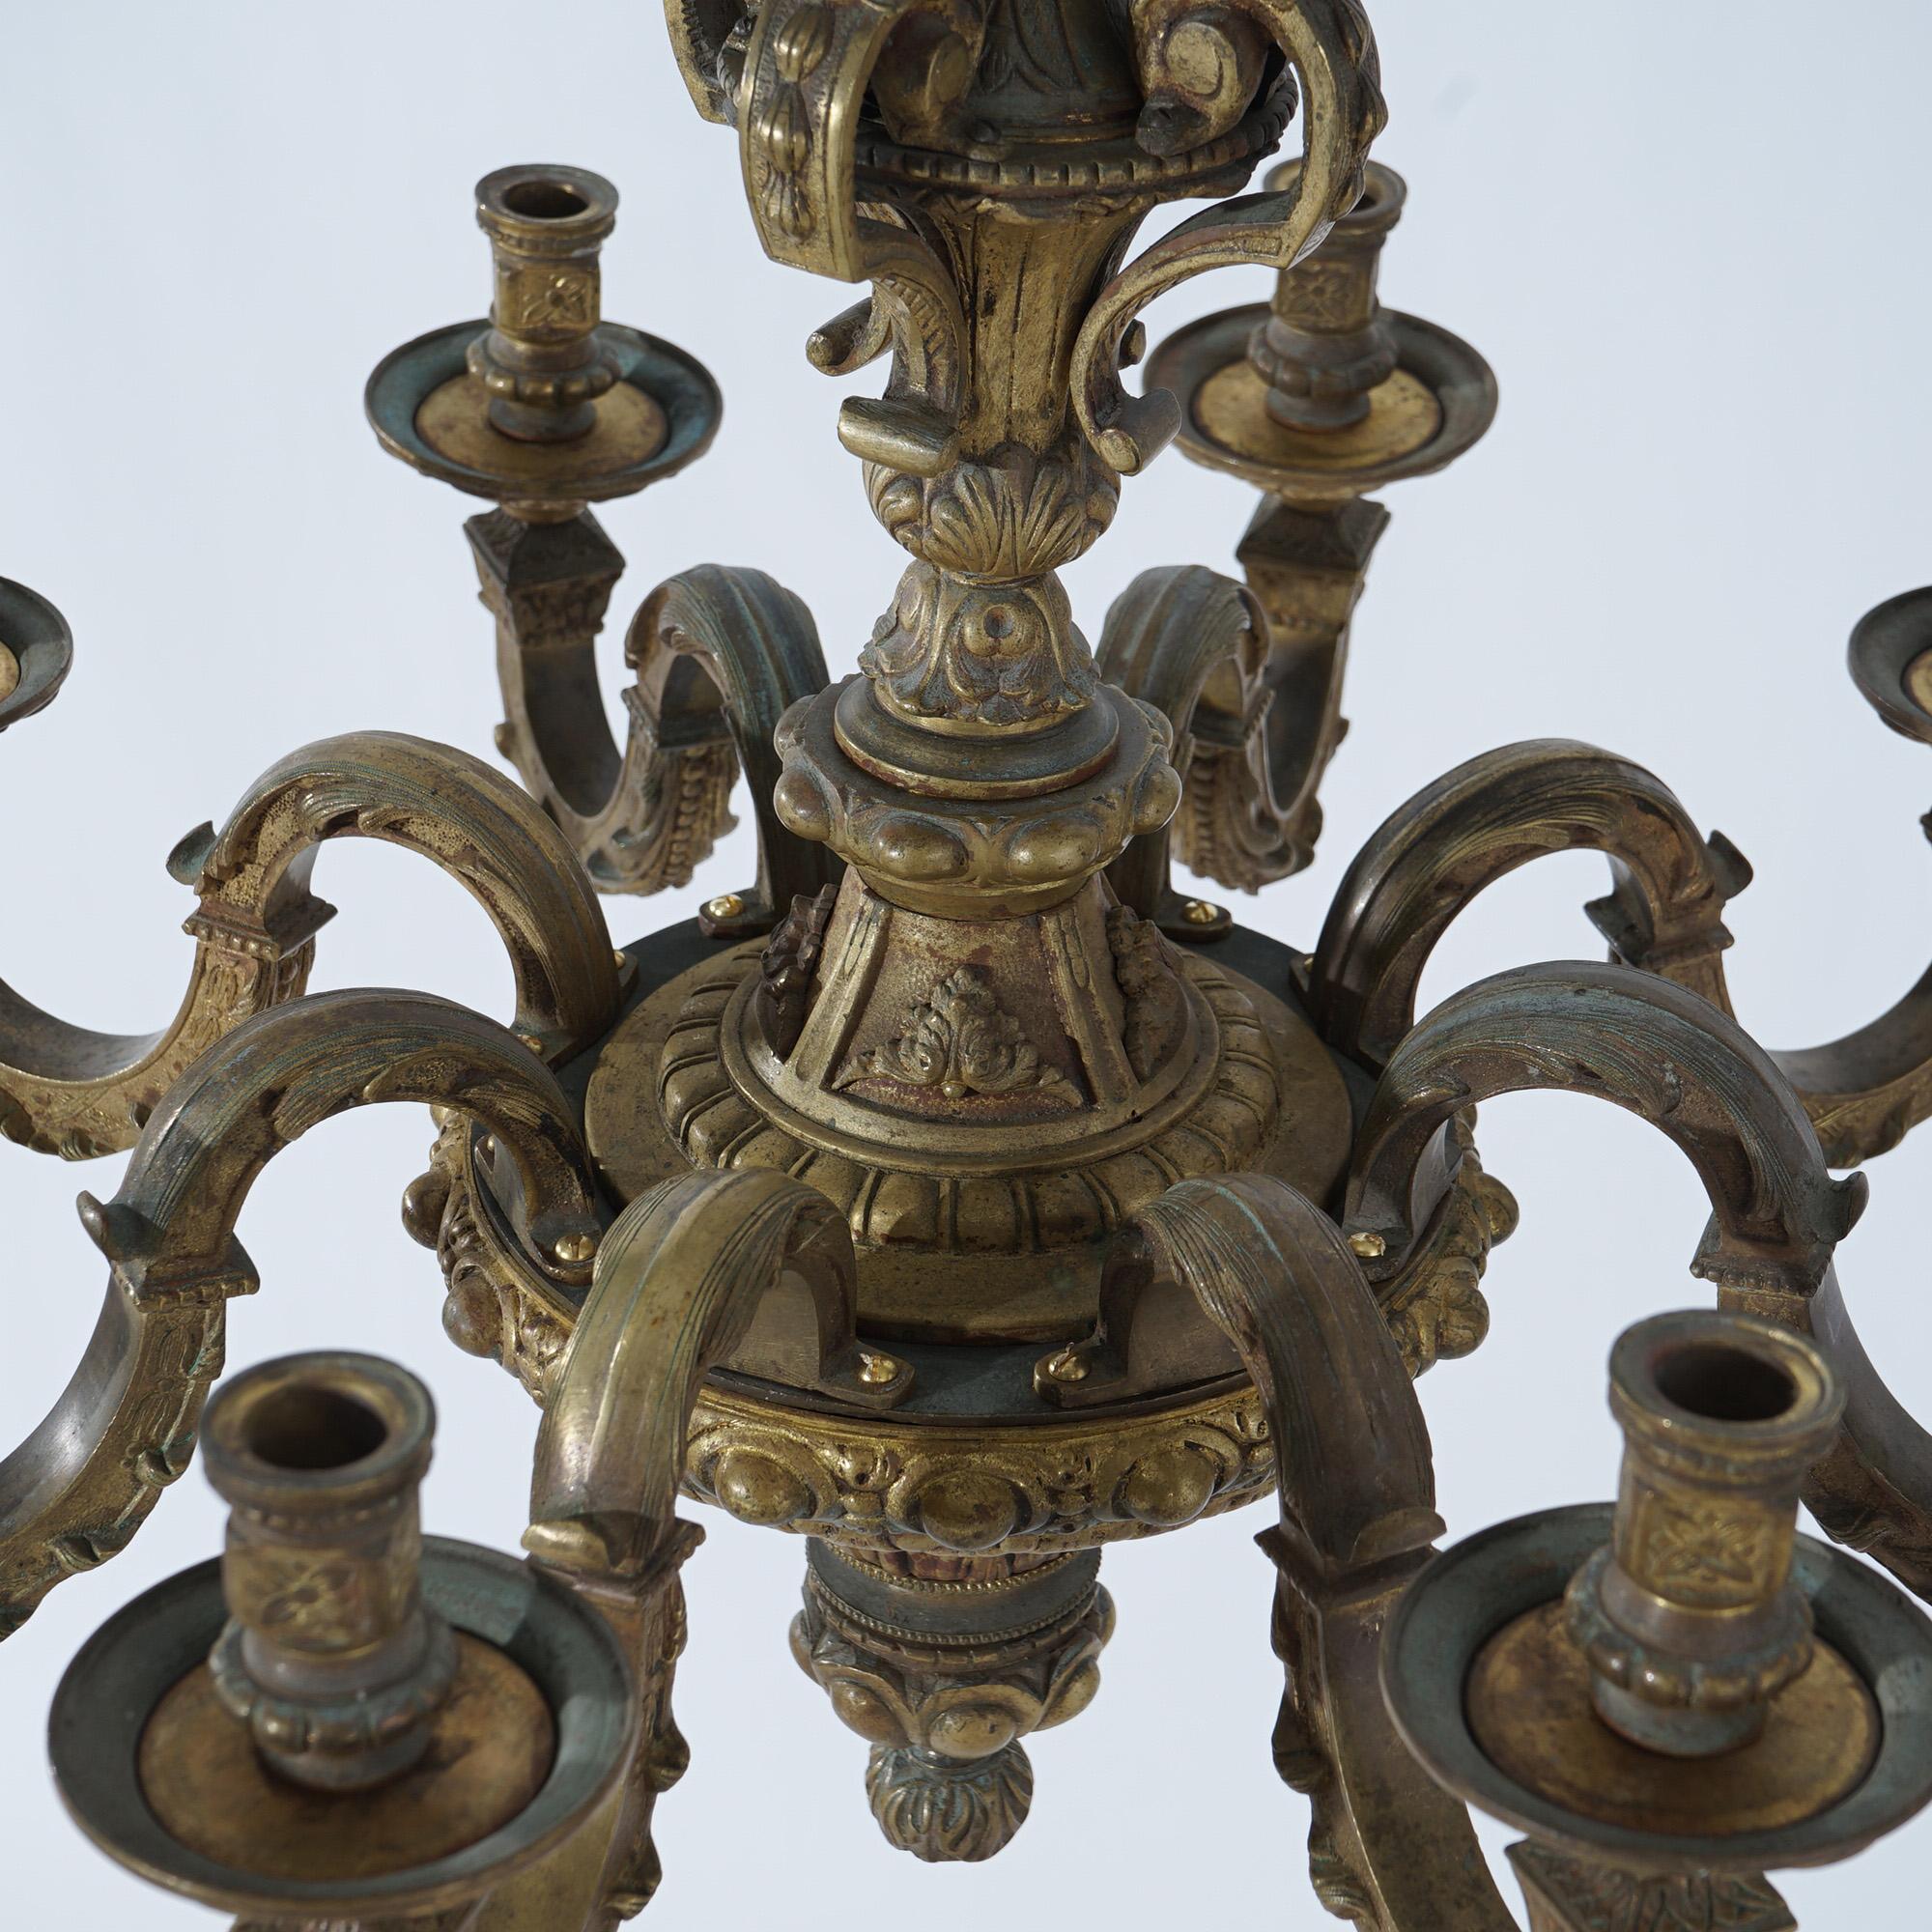 Antique Caldwell French Louis XIV Figural 8-Light Candelabra Chandelier 19thC For Sale 2